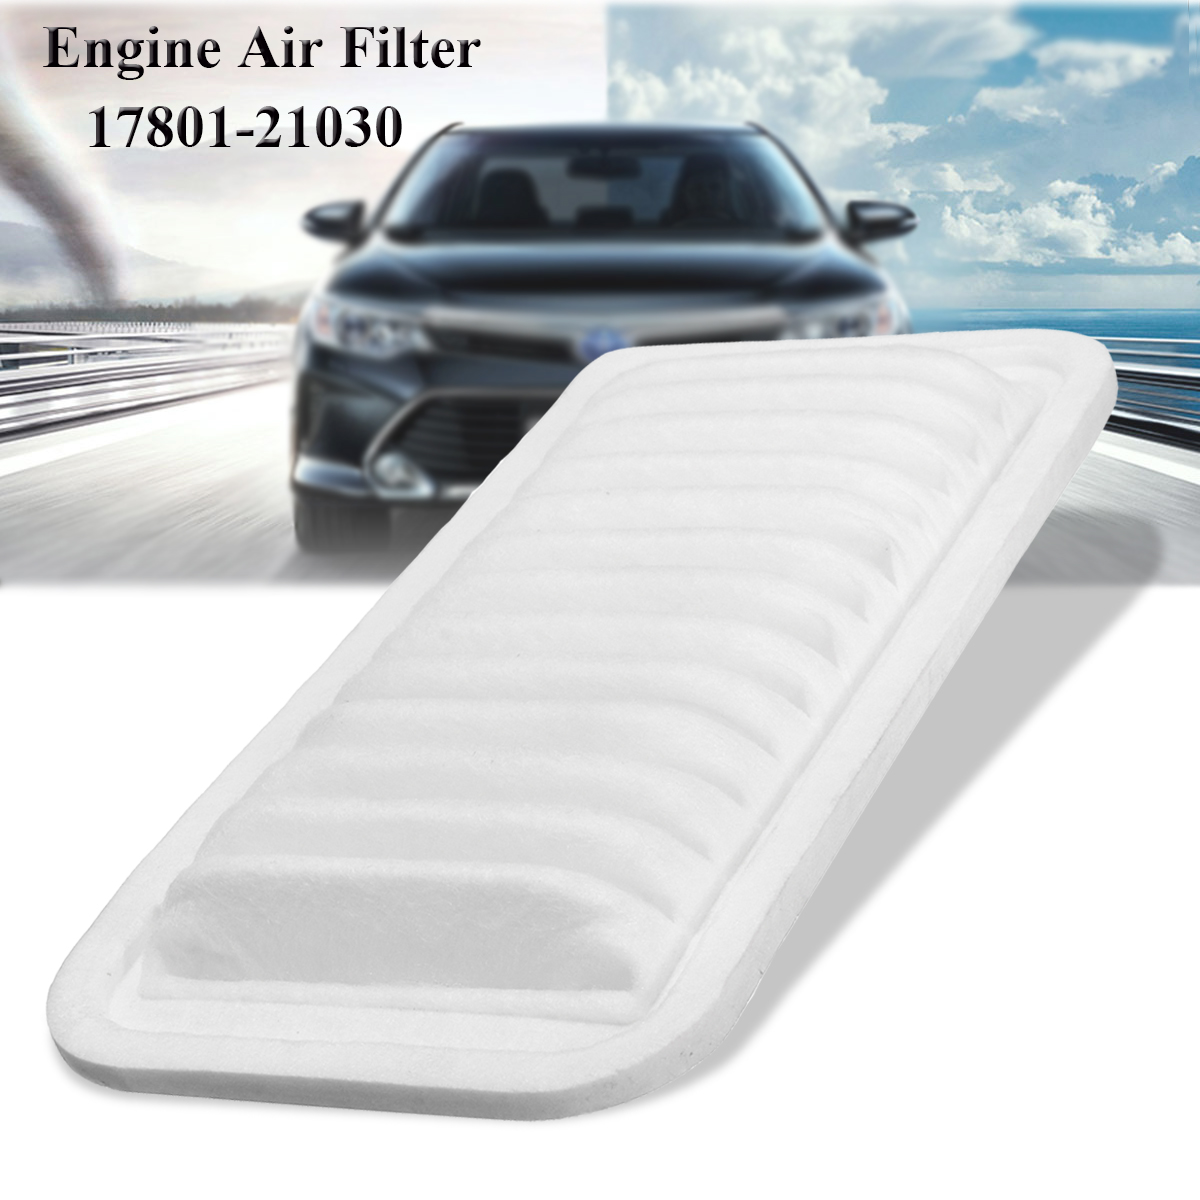 Blue-And-White-Engine-Air-Filter-For-Toyota-Yaris-Echo-Scion-XA-XB-00-05-1335820